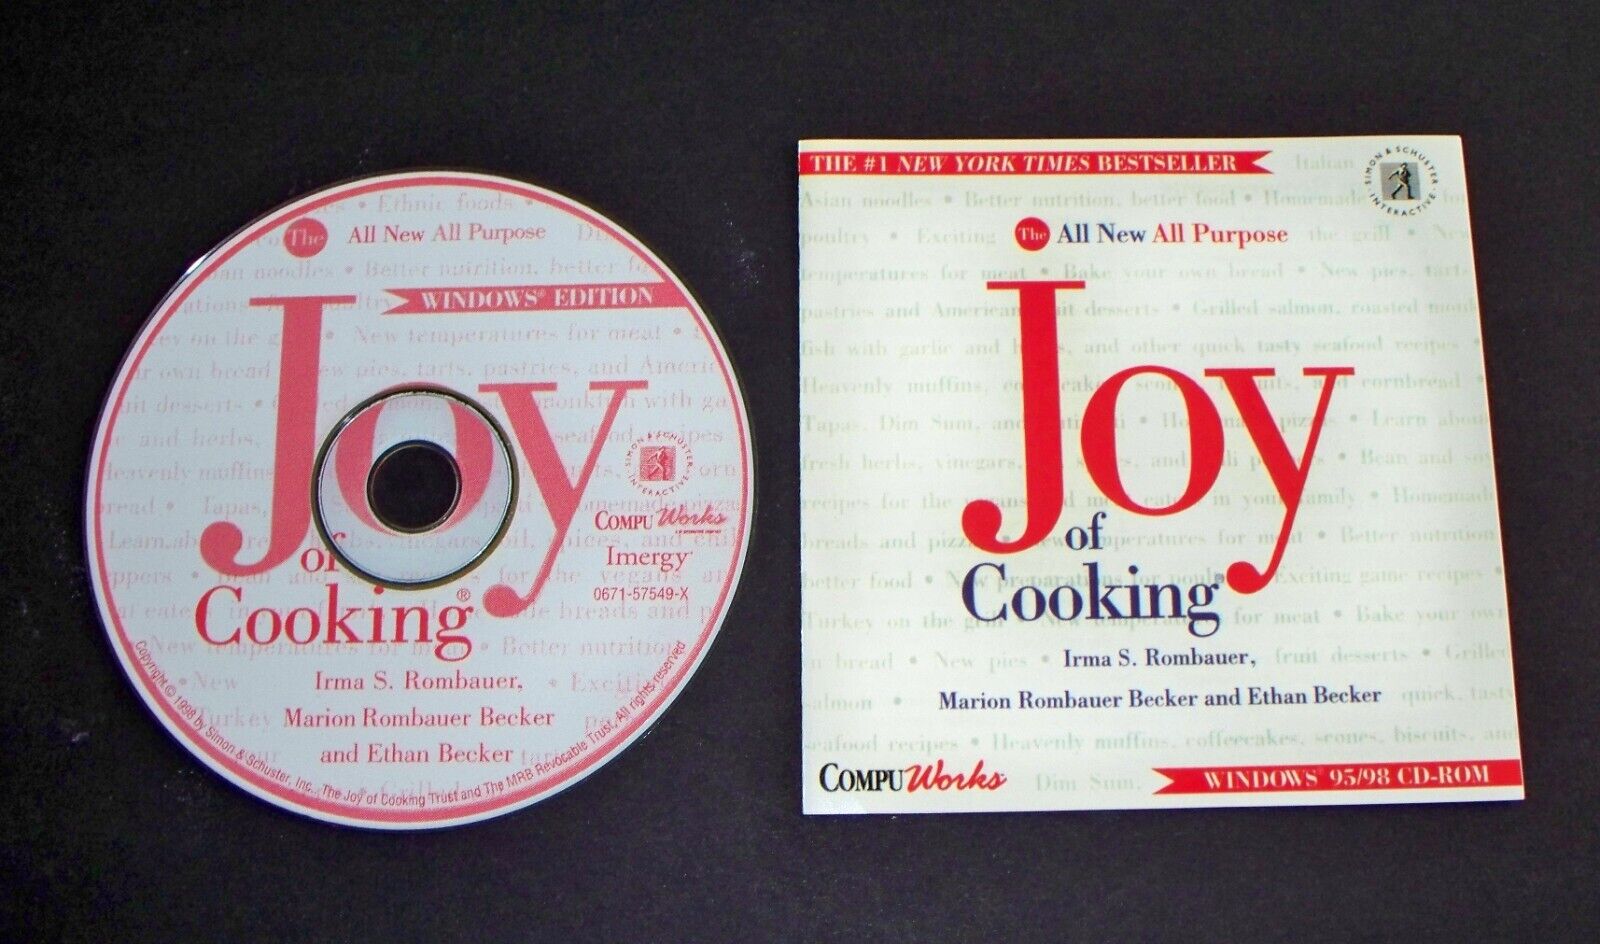 The Joy of Cooking CD-ROM - Instructional Windows 95/98